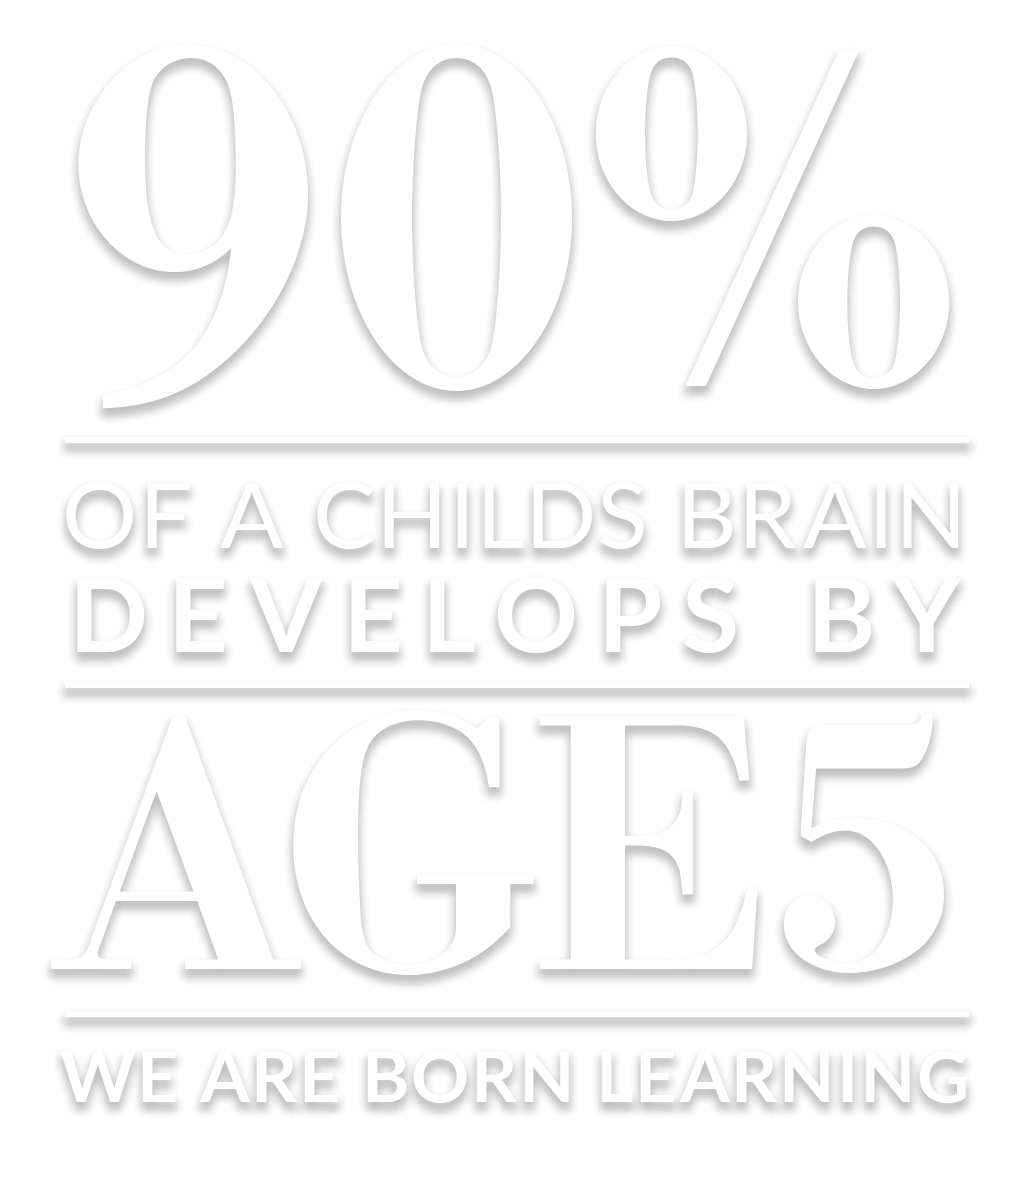 90% of a child's brain develops by age 5. We are born learning